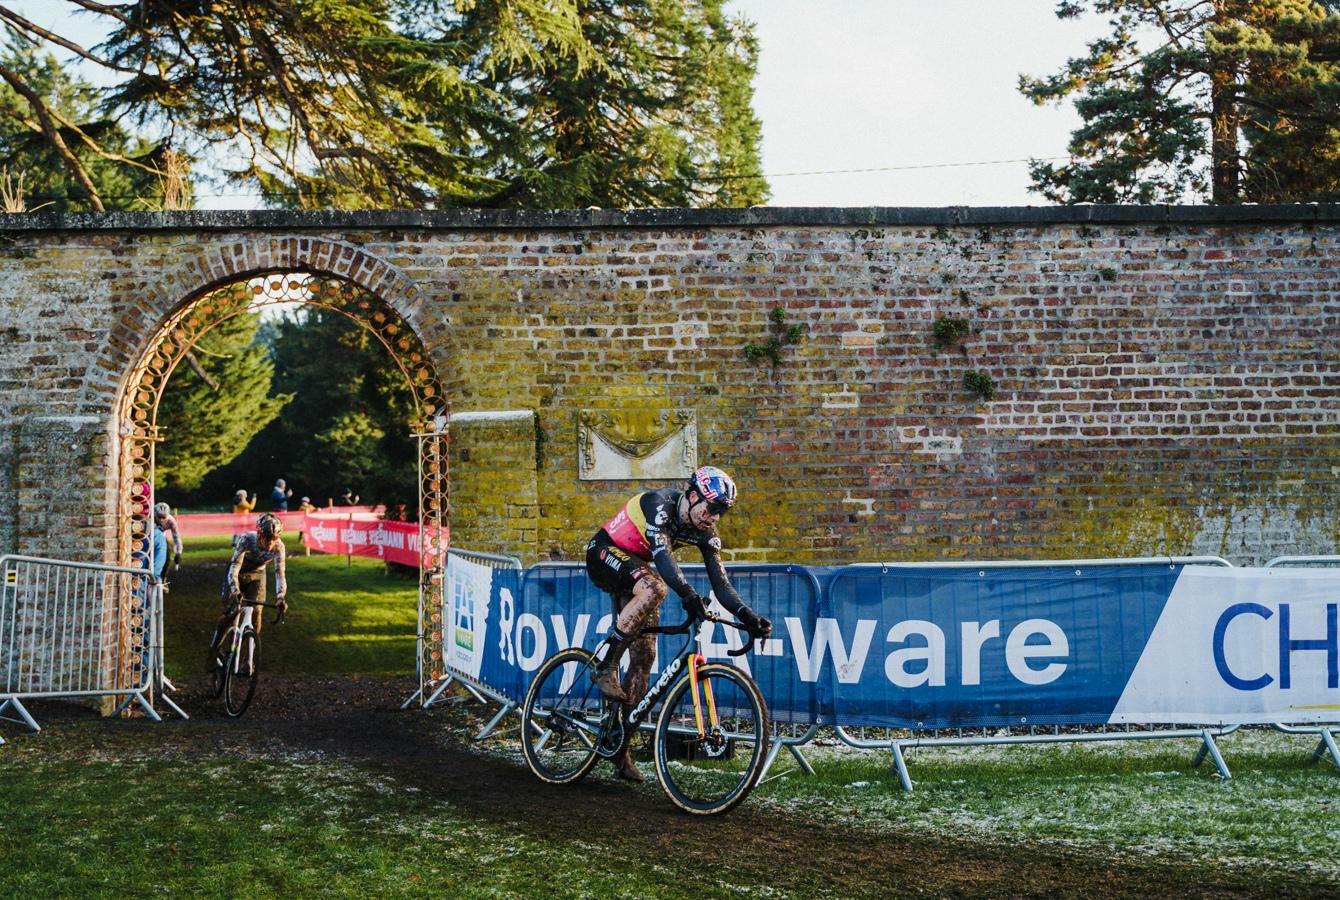 Royal A-ware partner of UCI Cyclo-cross World Cup for two more years